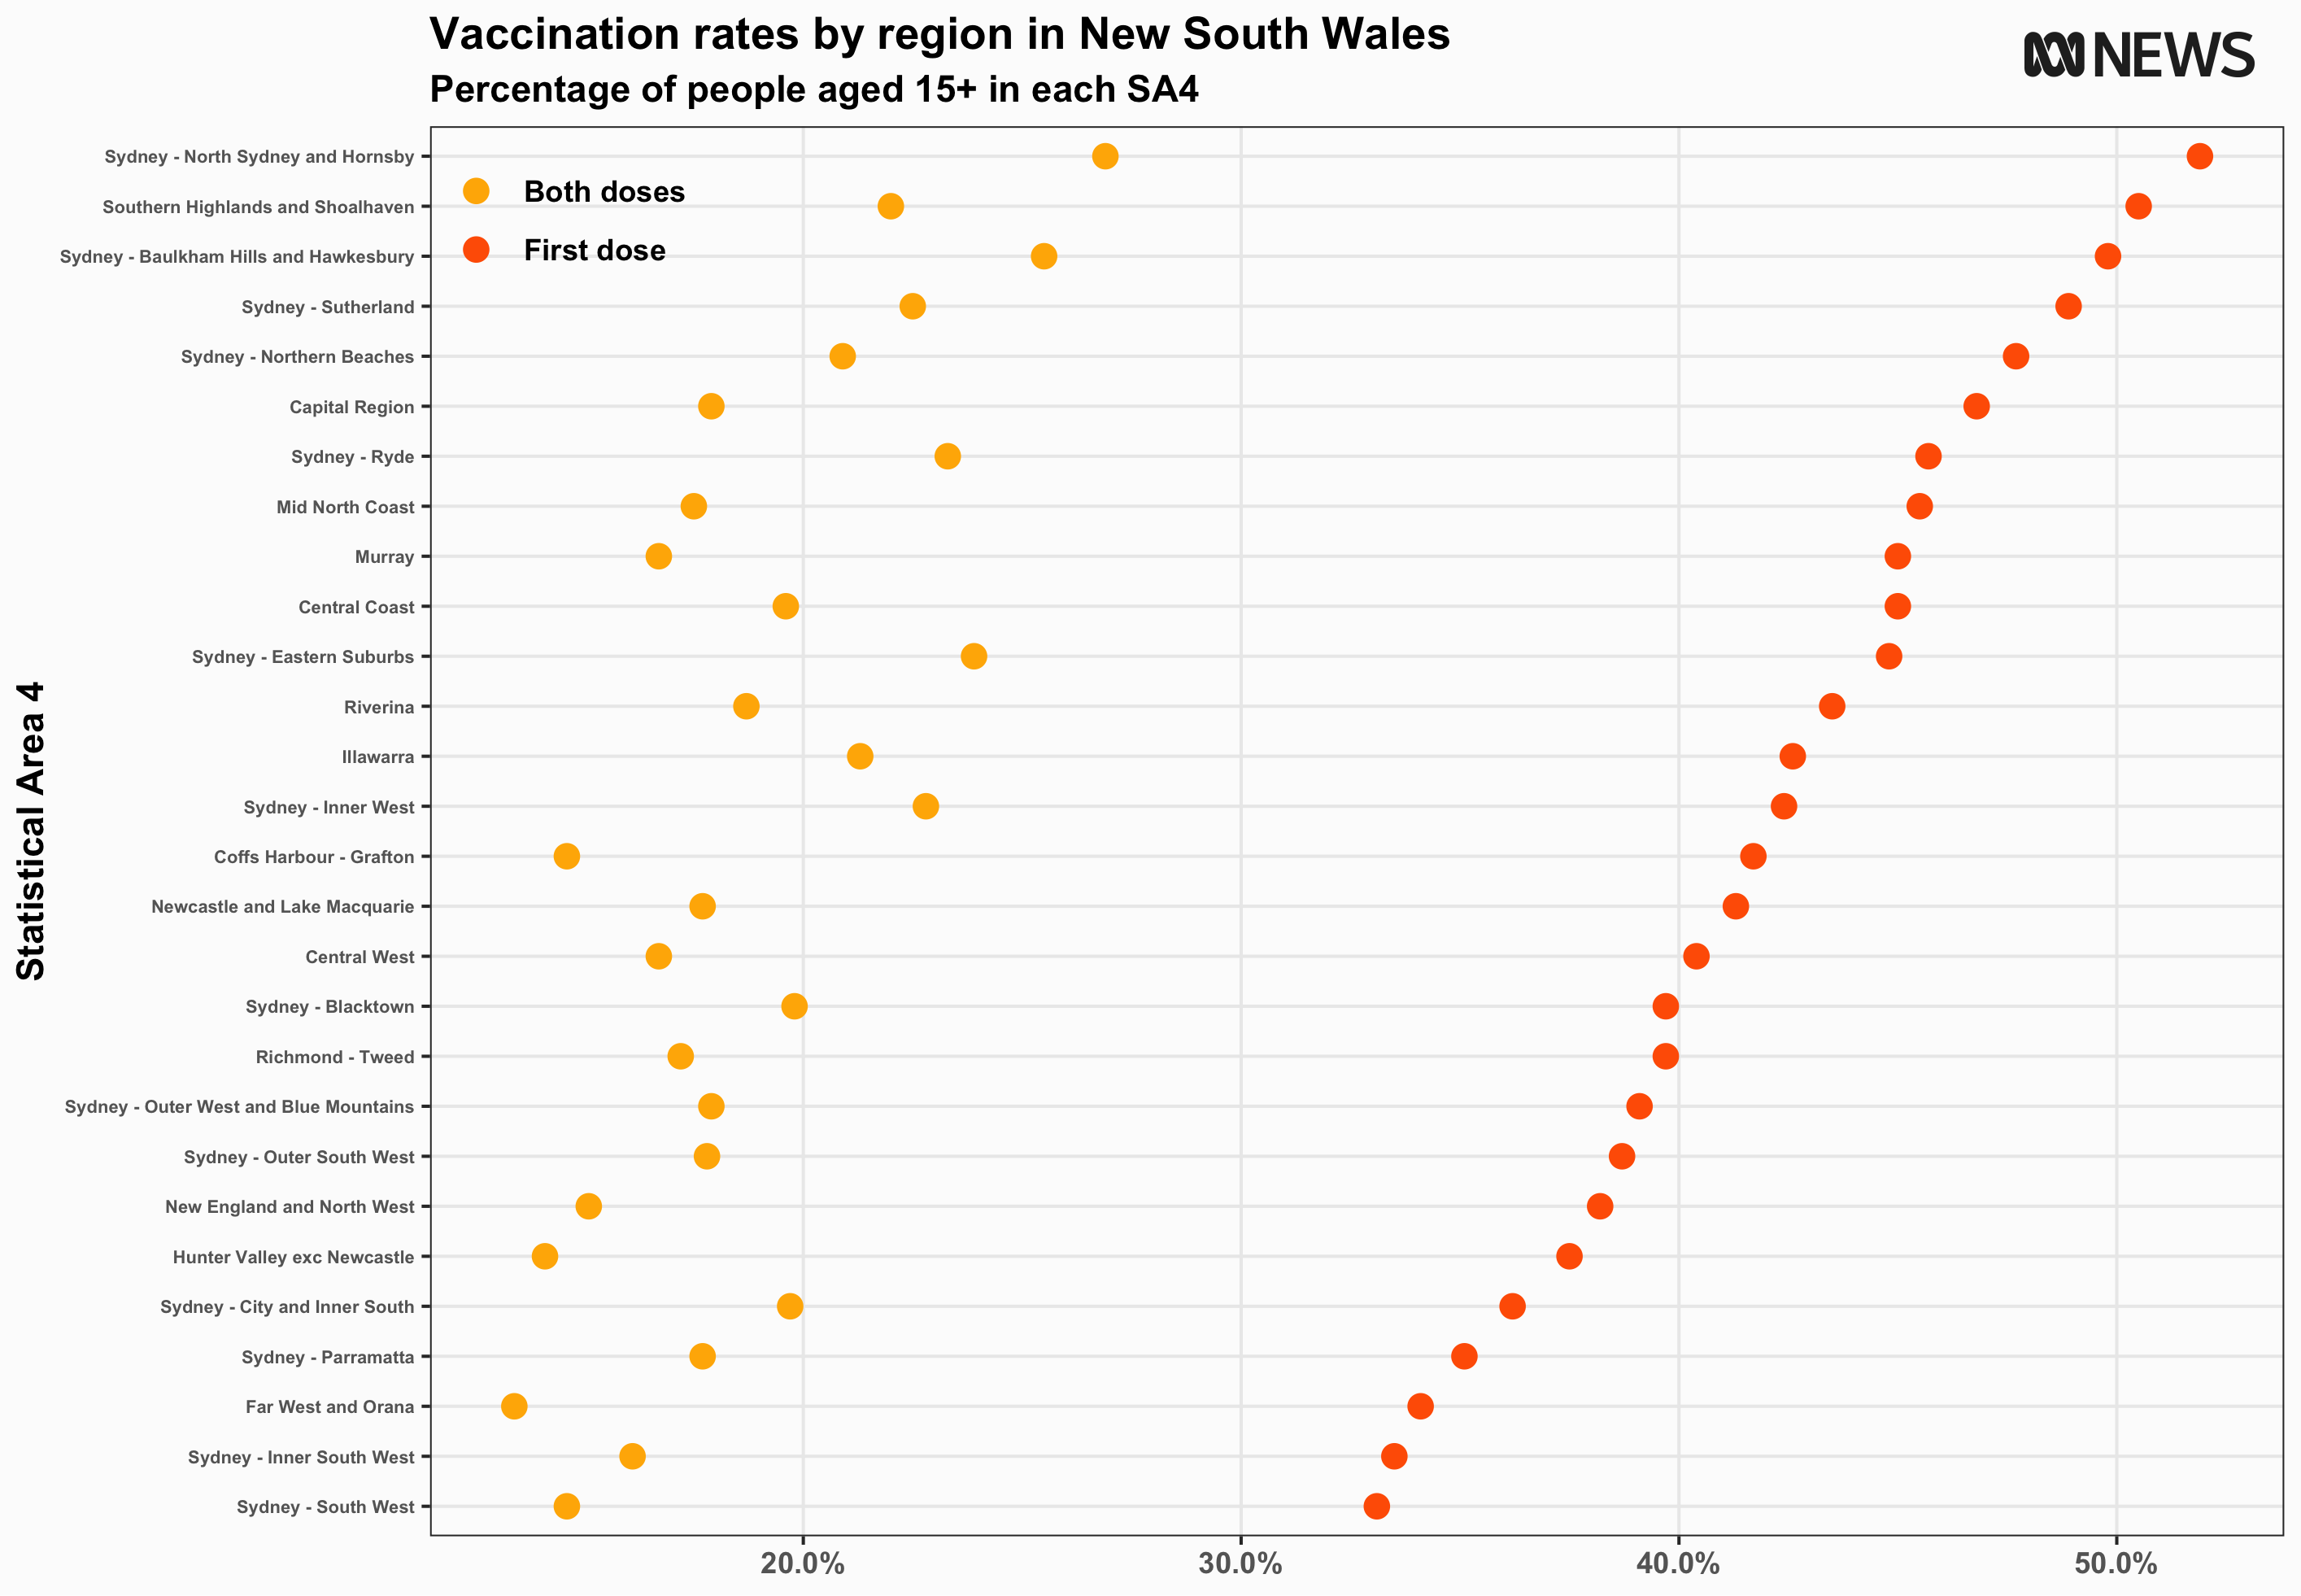 NSW vaccination data by region 2 August 2021